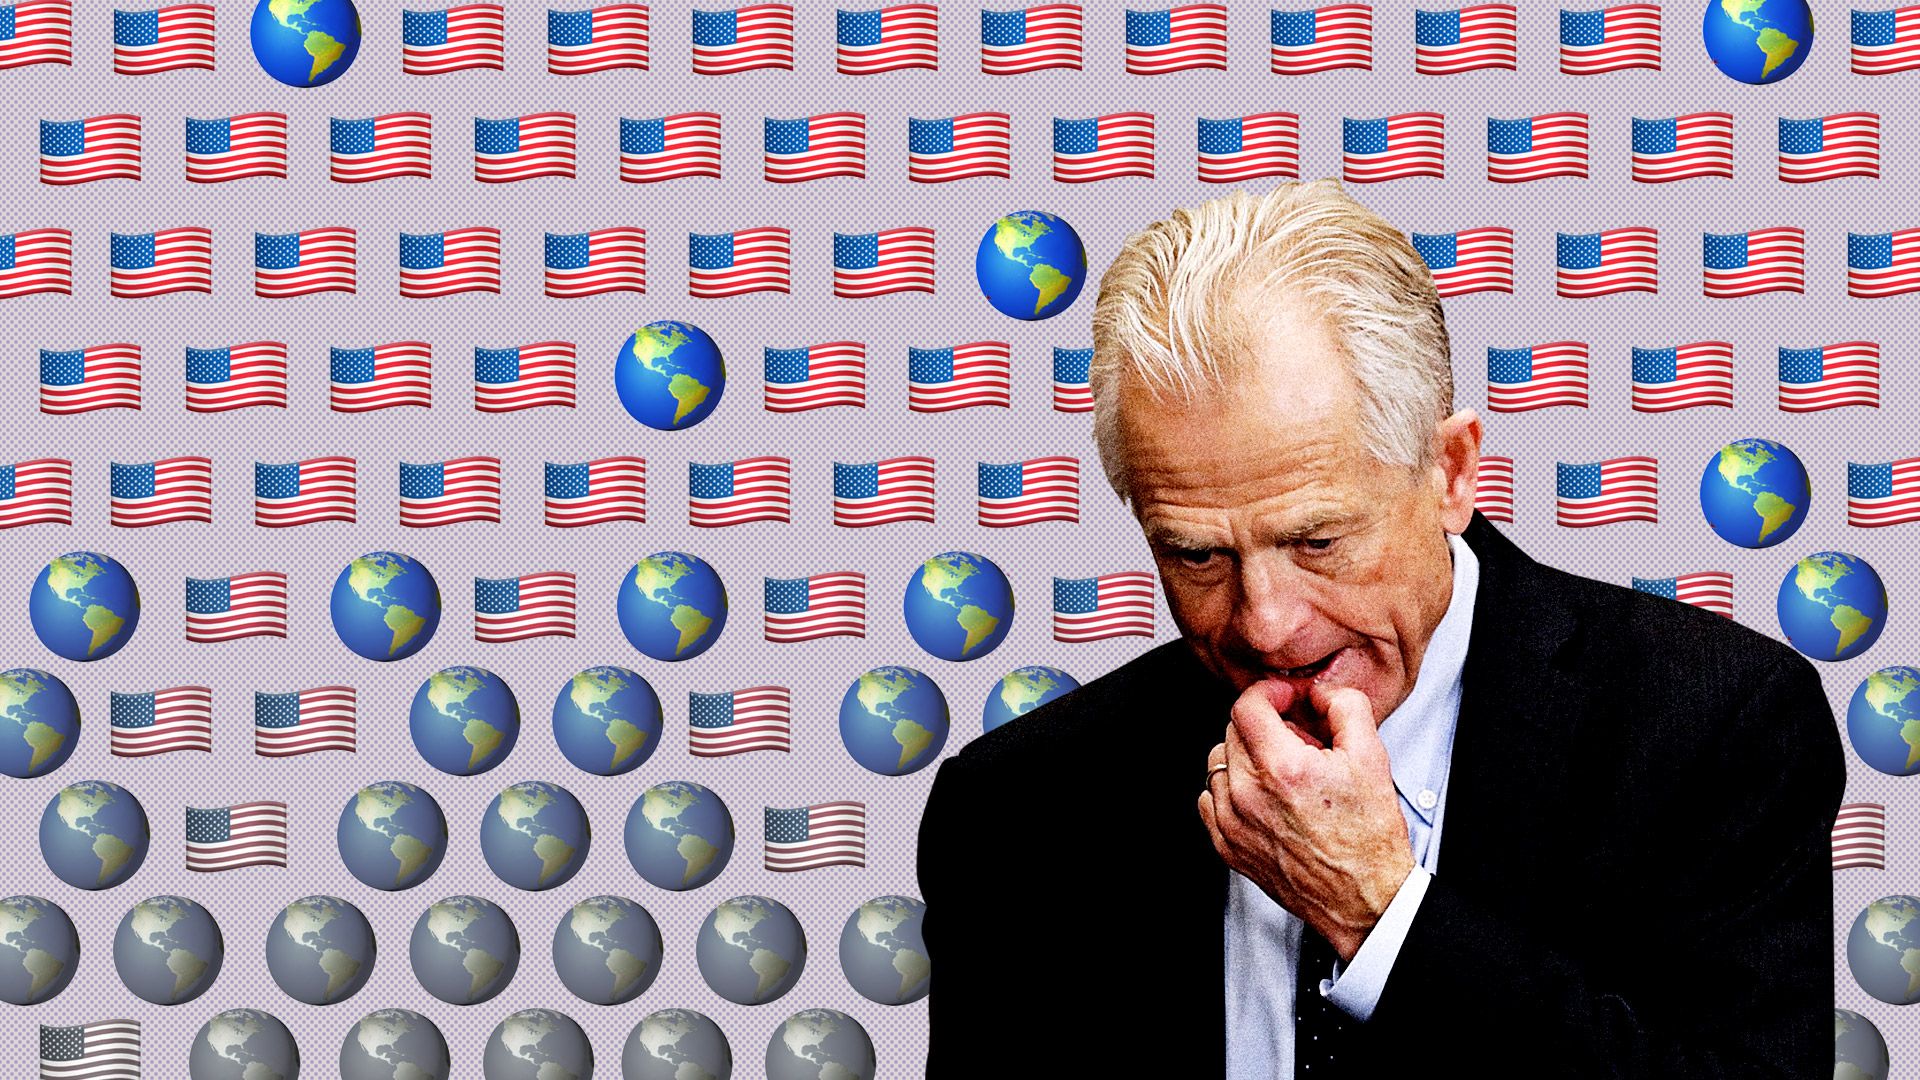 Peter Navarro's radical transformation — from globalist to nationalist.